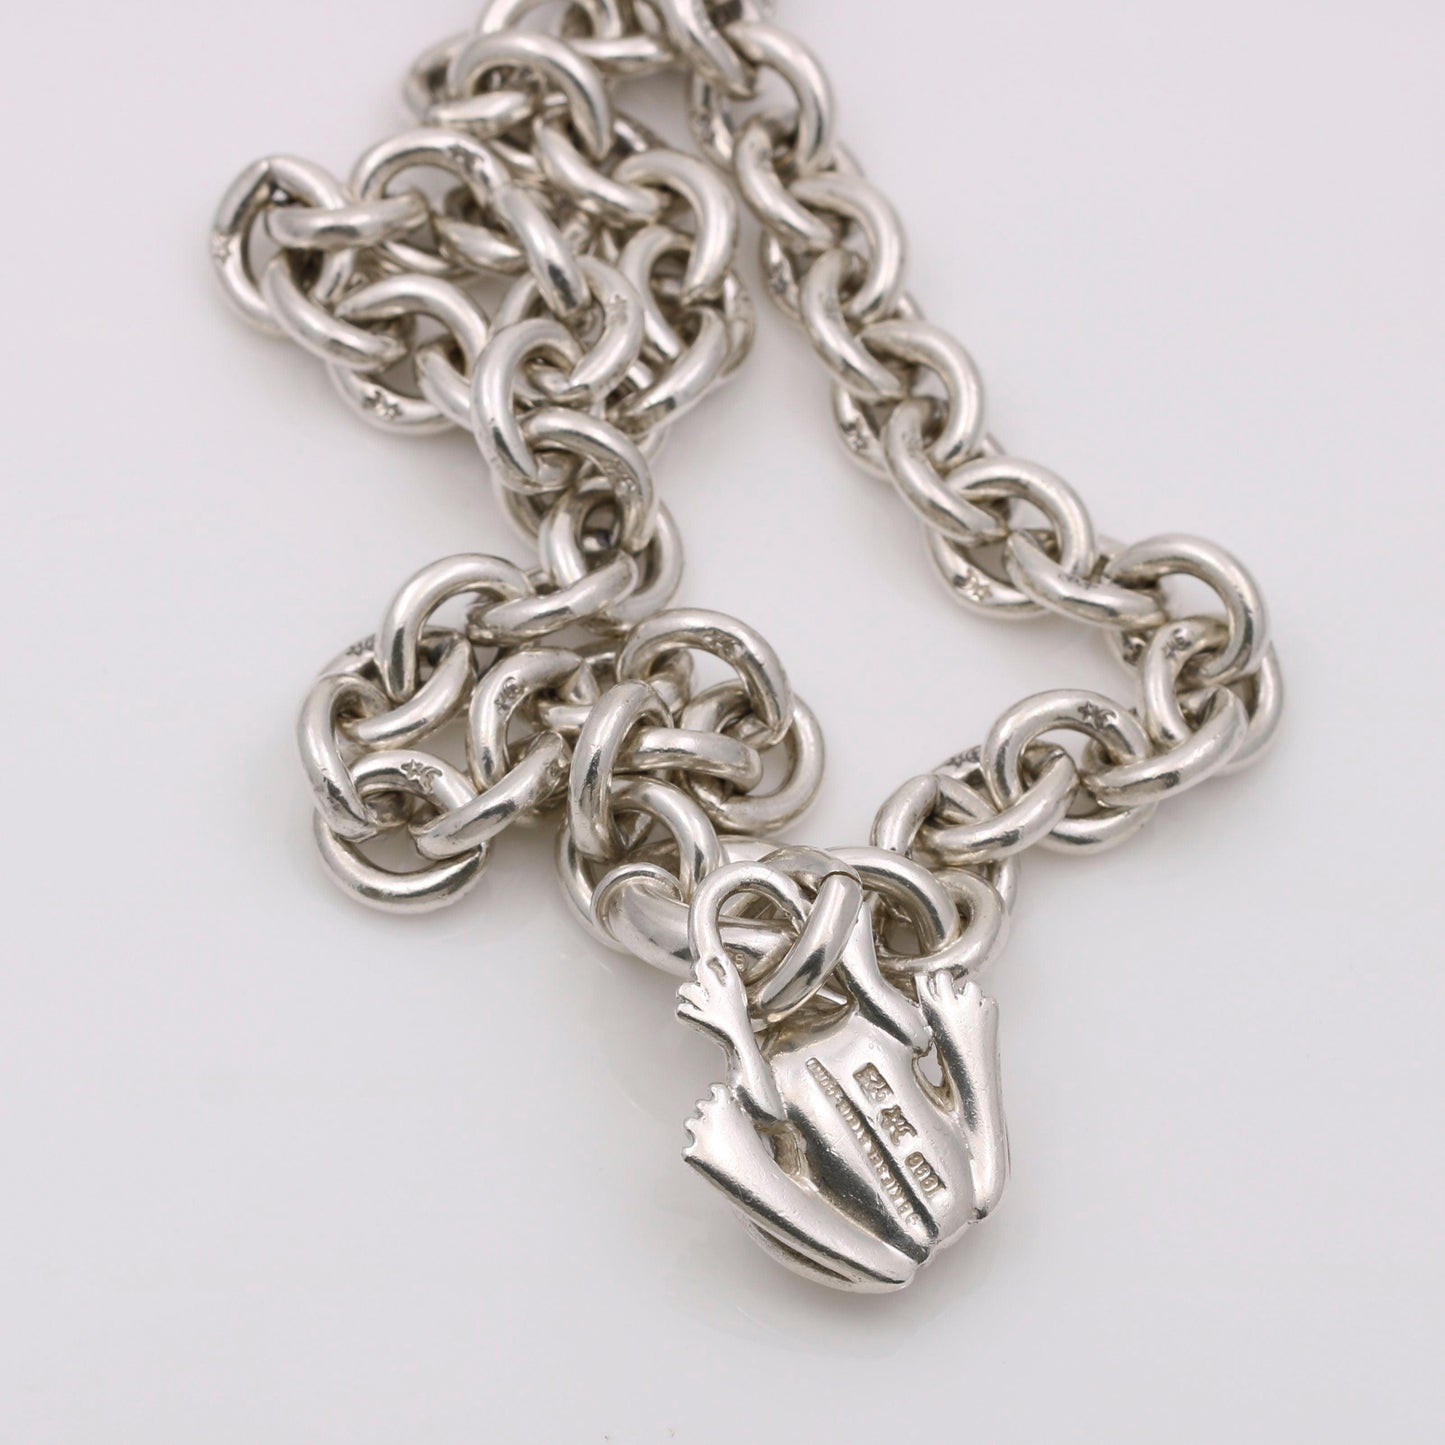 Kieselstein-Cord Frog Charm Chain Necklace in Sterling Silver - 31 Jewels Inc.